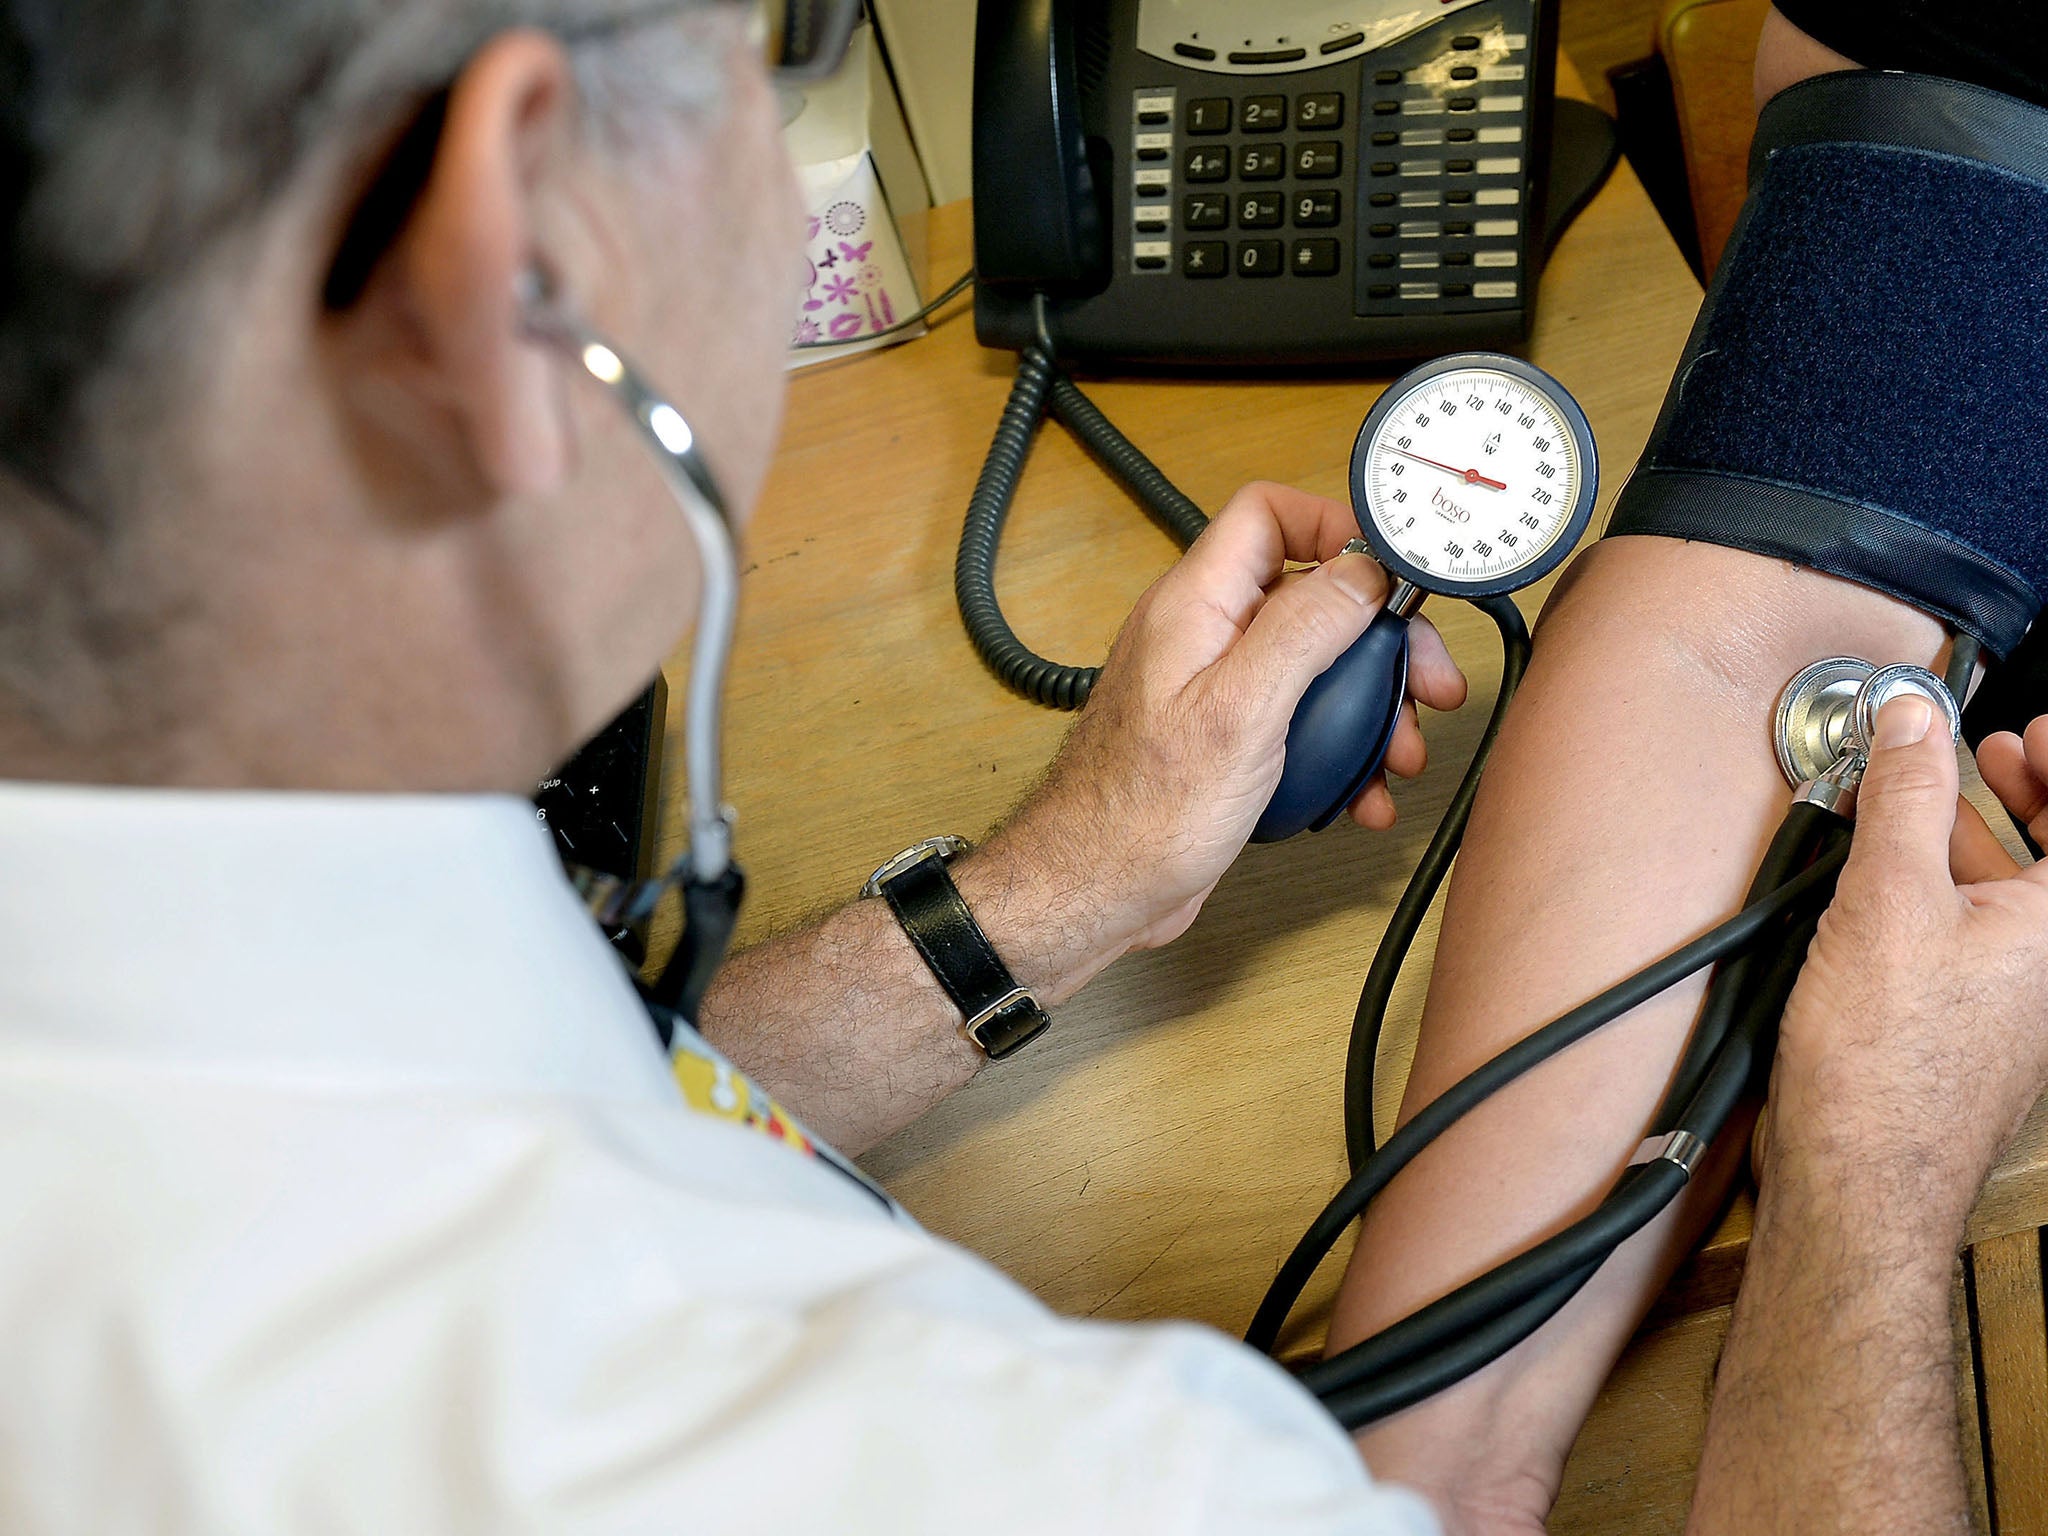 NHS England is urging patients to cancel appointments rather than just not show up as it revealed more than 15 million GP appointments are missed each year